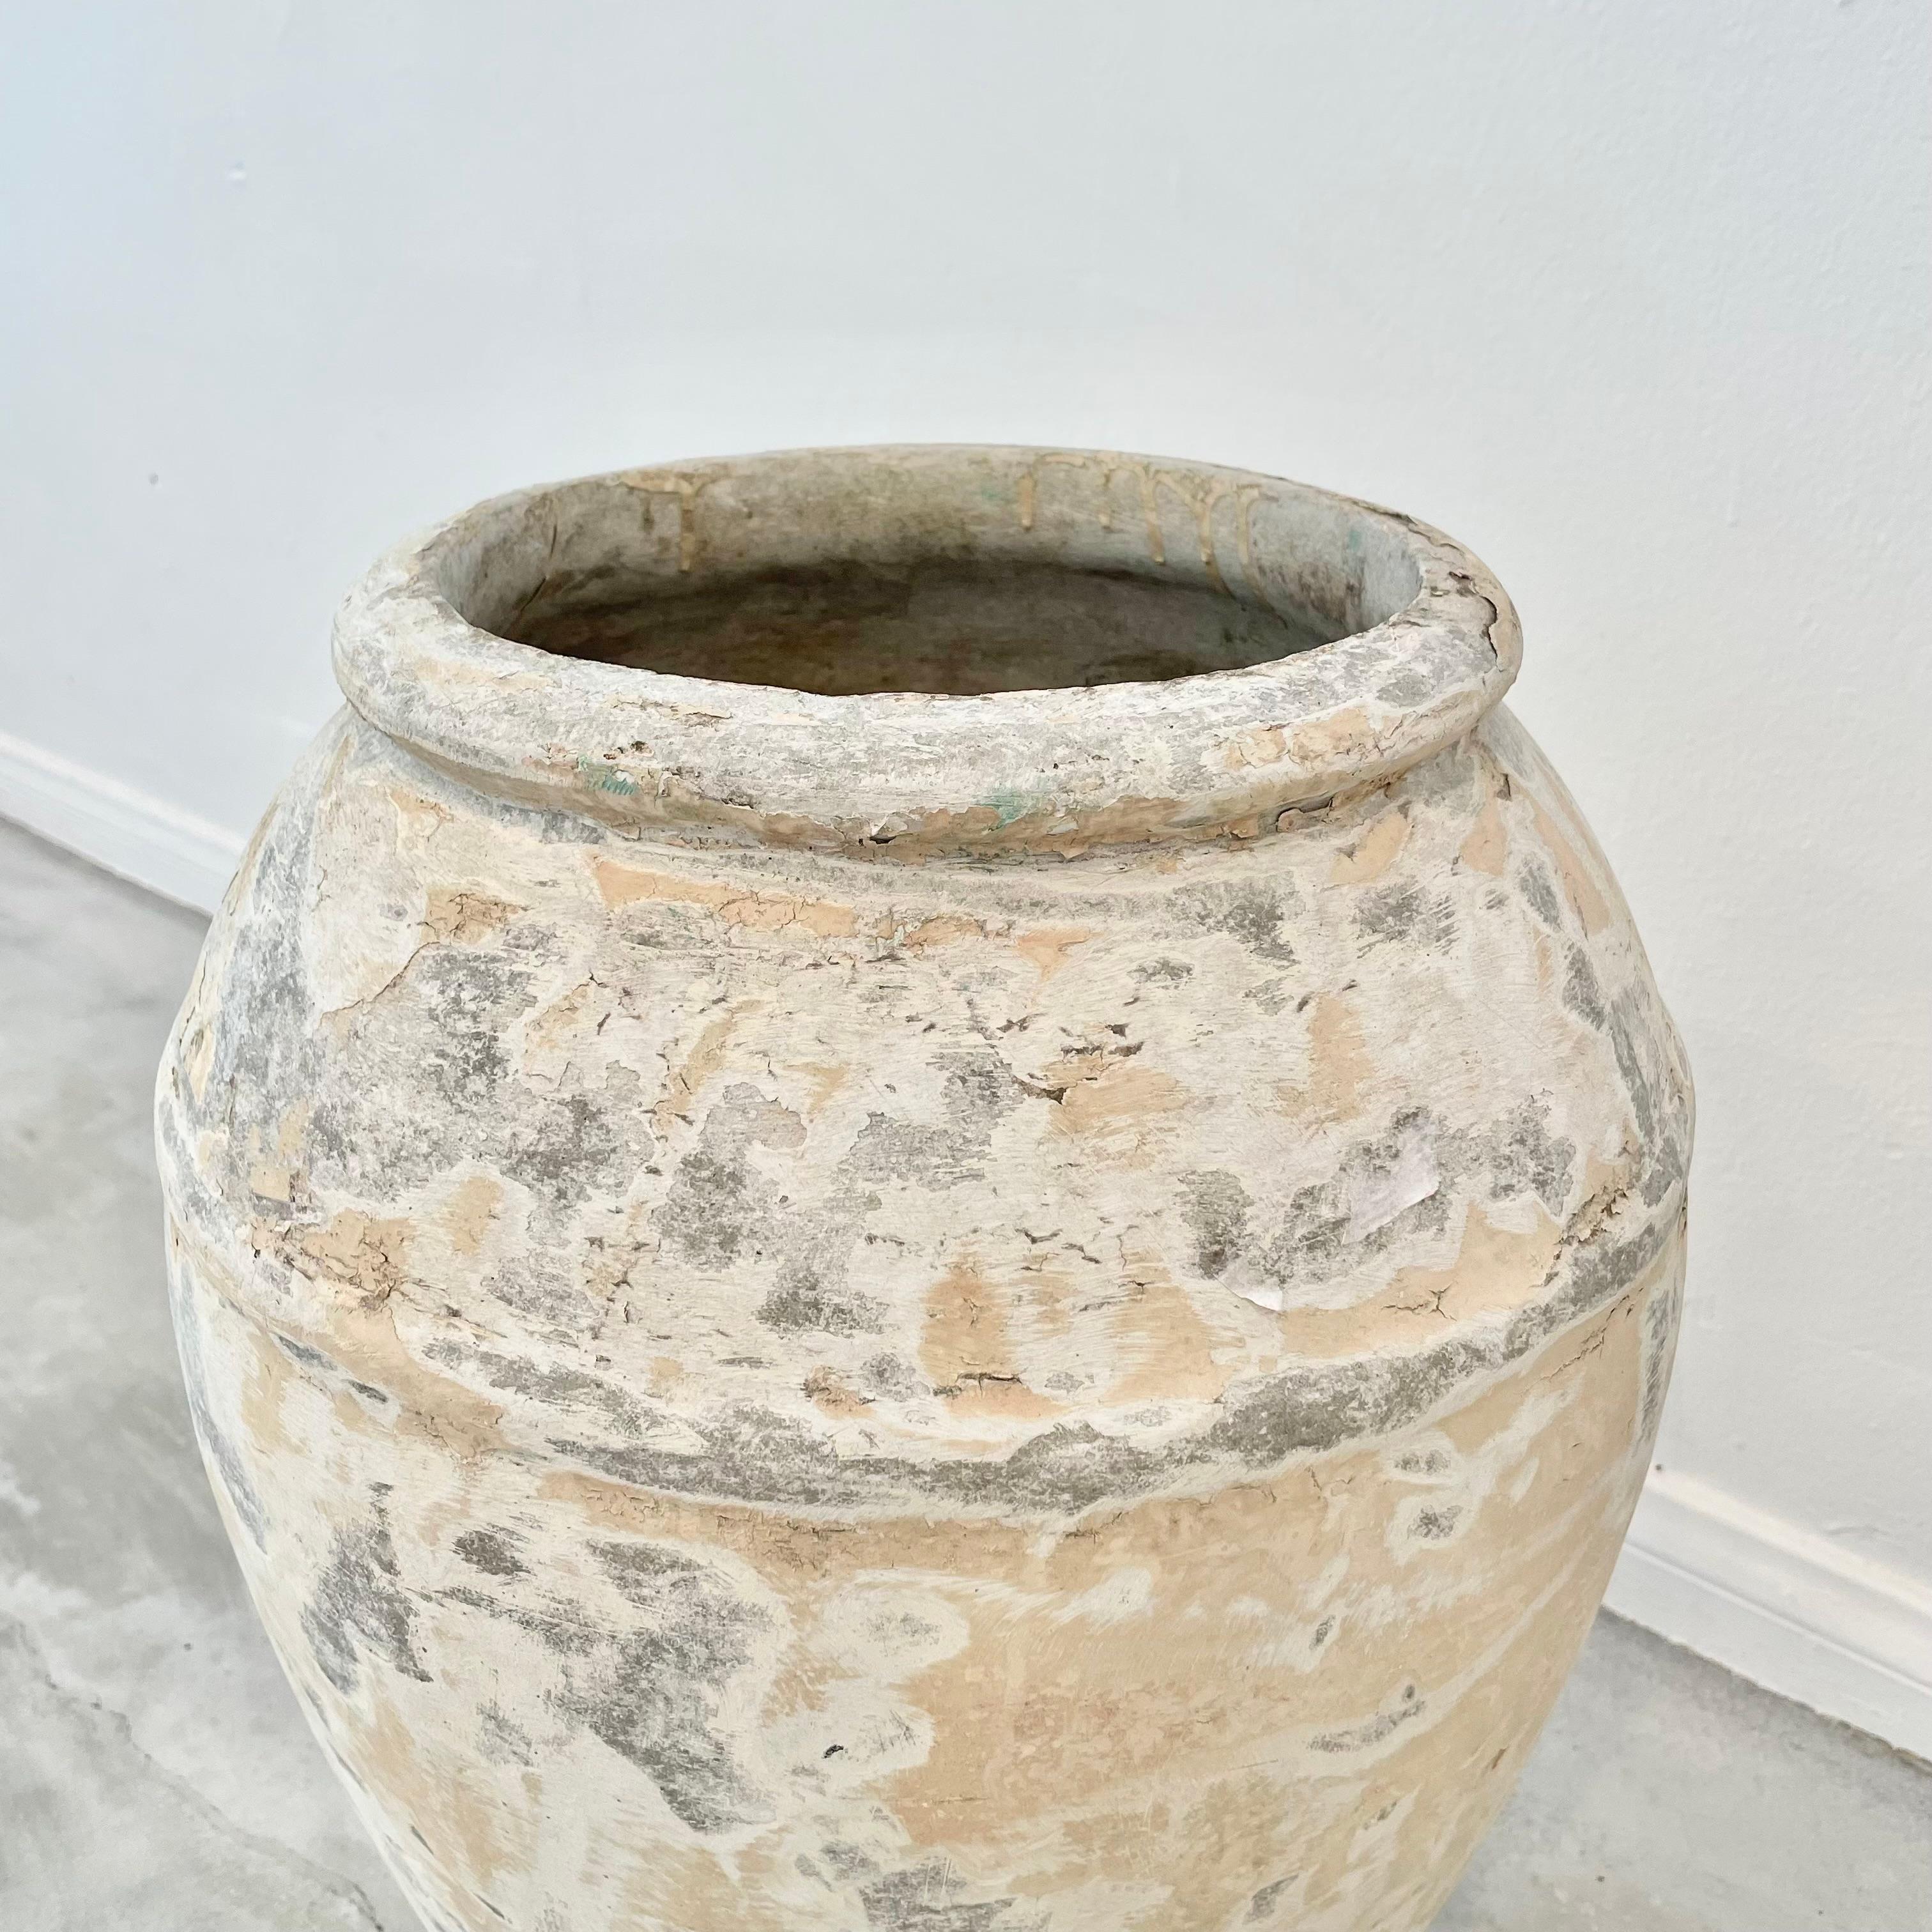 Concrete urn by Willy Guhl. Rare model. In a beautiful washed out patina from layers of finishes worn down over the years. Urn has a delicate cement ridge around the mouth as well as around the widest part of the jar giving it depth and delicate